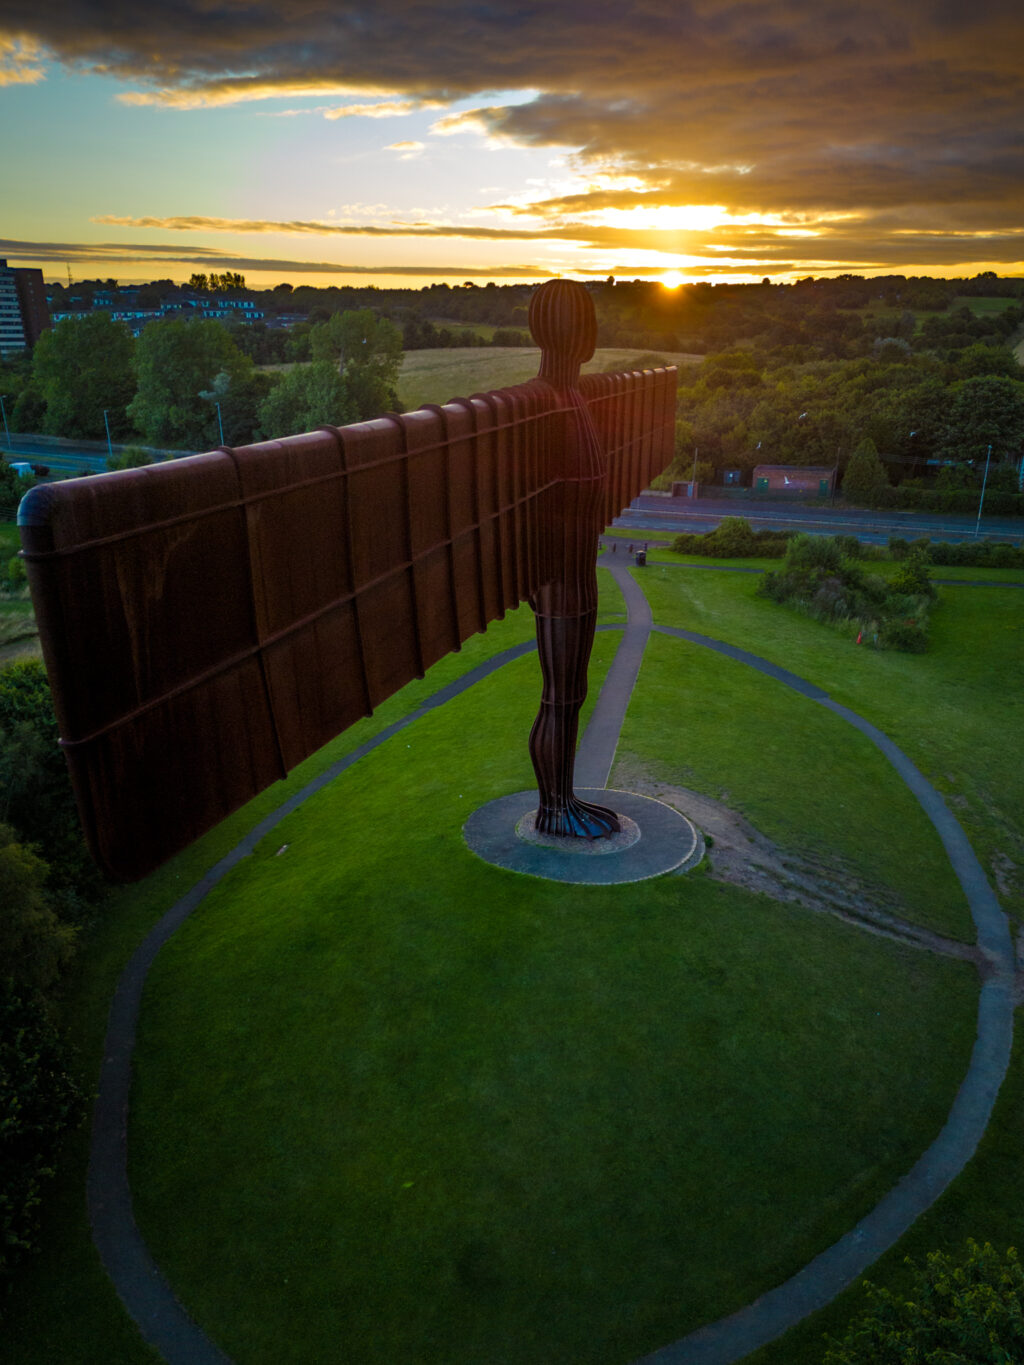 The Angel of the North near Newcastle at sunrise, shot from a DJI drone